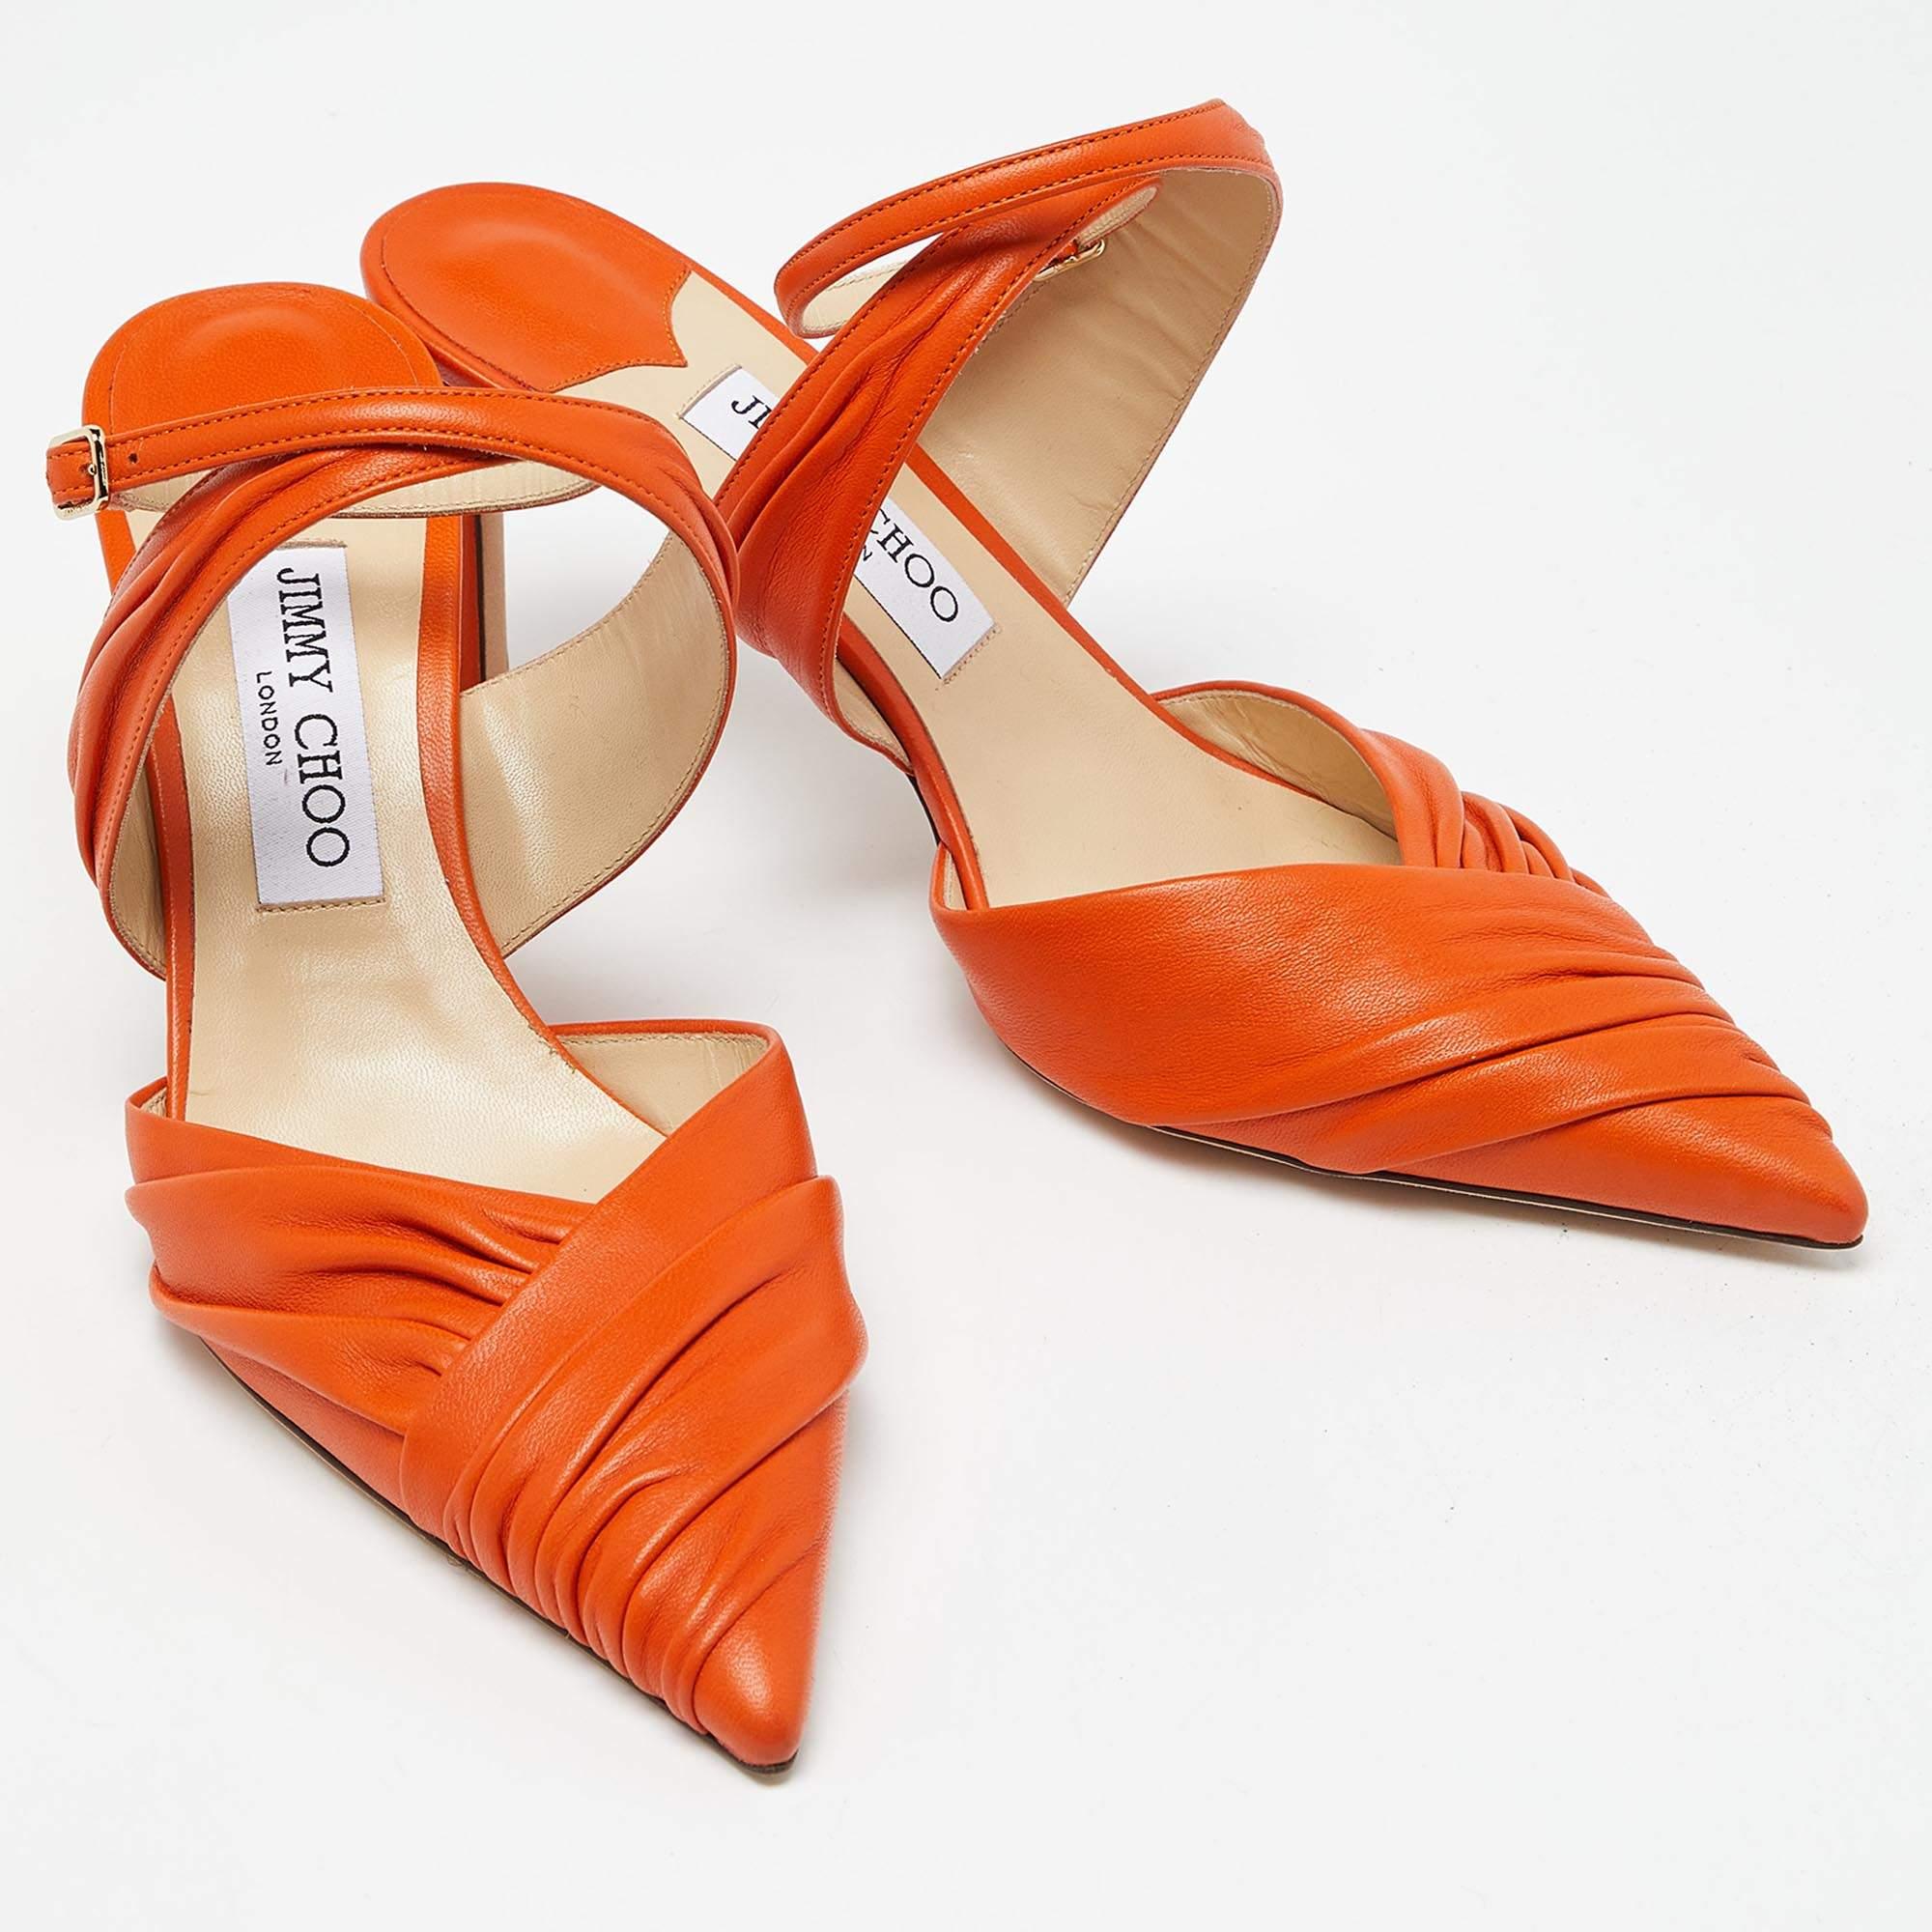 Jimmy Choo Orange Leather Pointed Toe Ankle Strap Pumps Size 39 In Good Condition For Sale In Dubai, Al Qouz 2